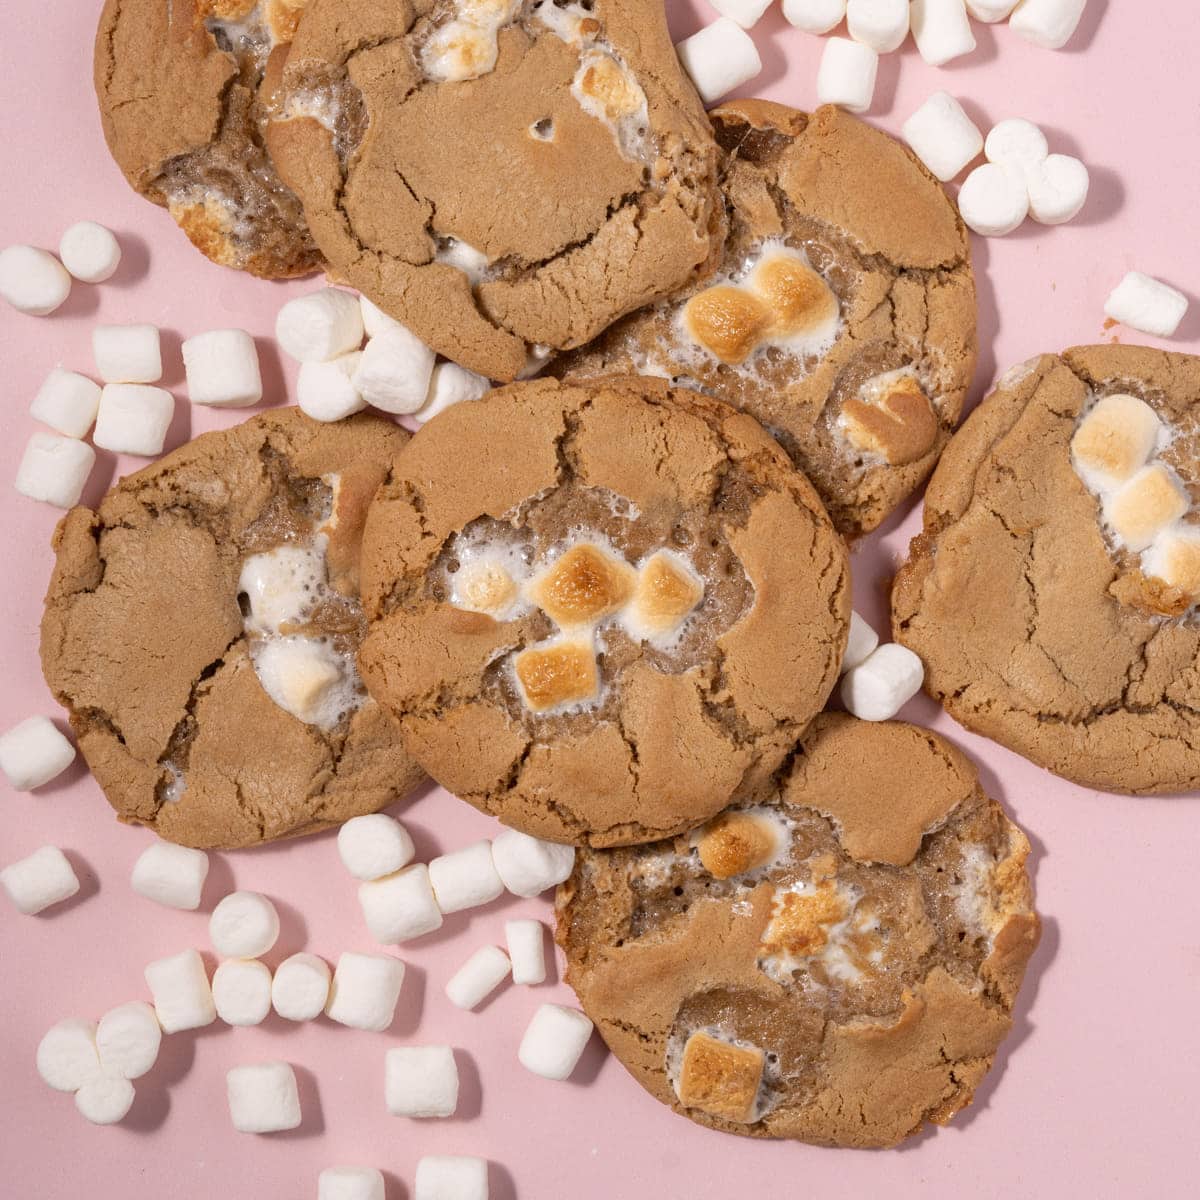 Toasted Marshmallow Cookies on a pink background